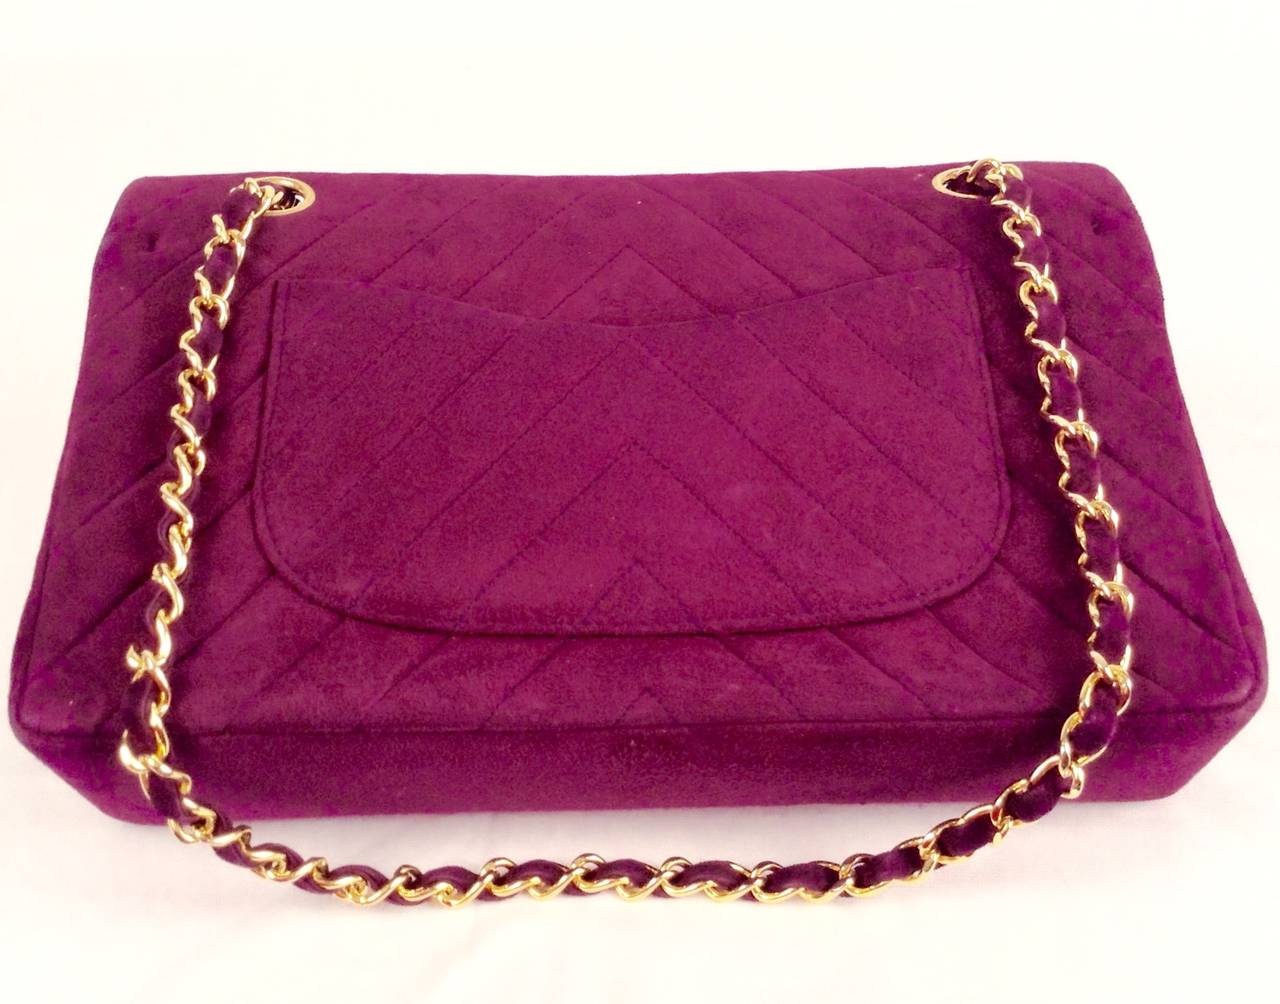 Vintage Chanel Plum Suede Chevron Quilted Double Flap Bag In Excellent Condition For Sale In Palm Beach, FL